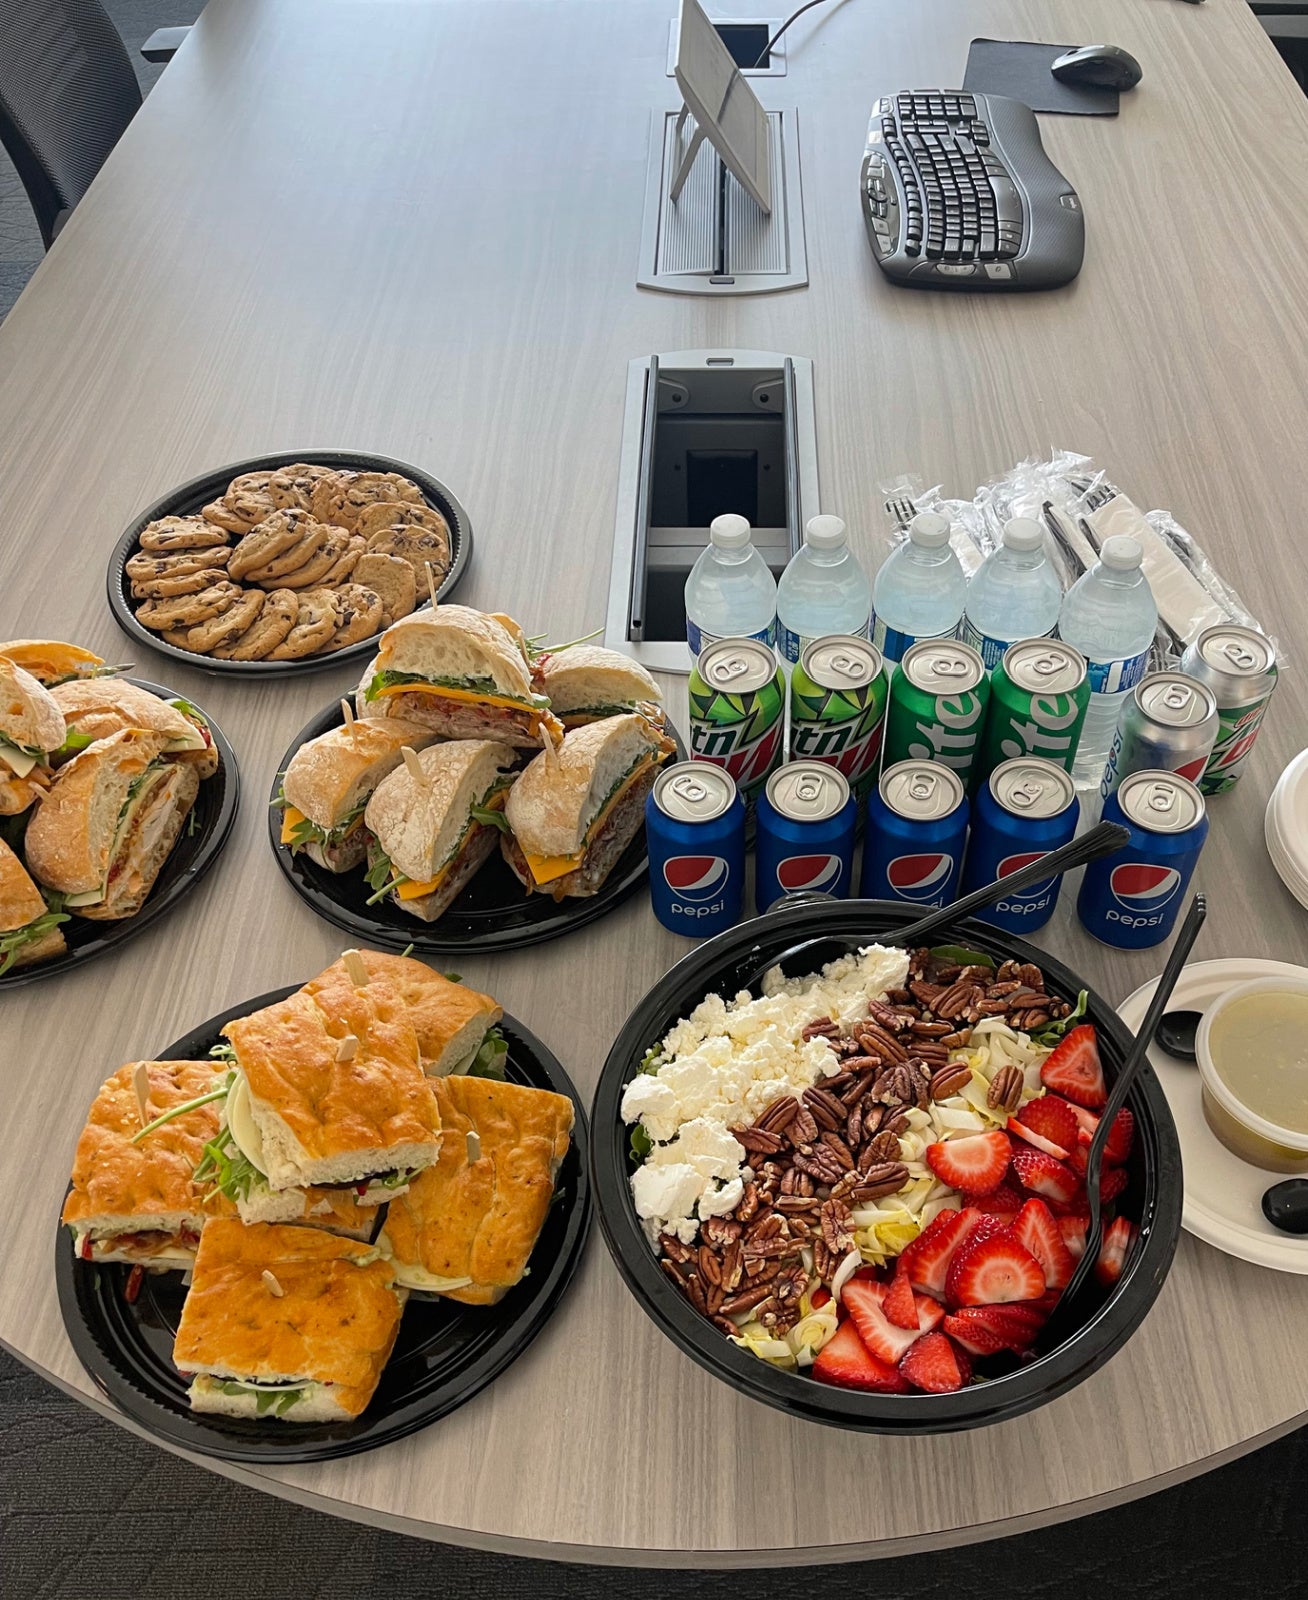 Shef Madres corporate catering lunch meeting with salads and sandwiches in boardroom